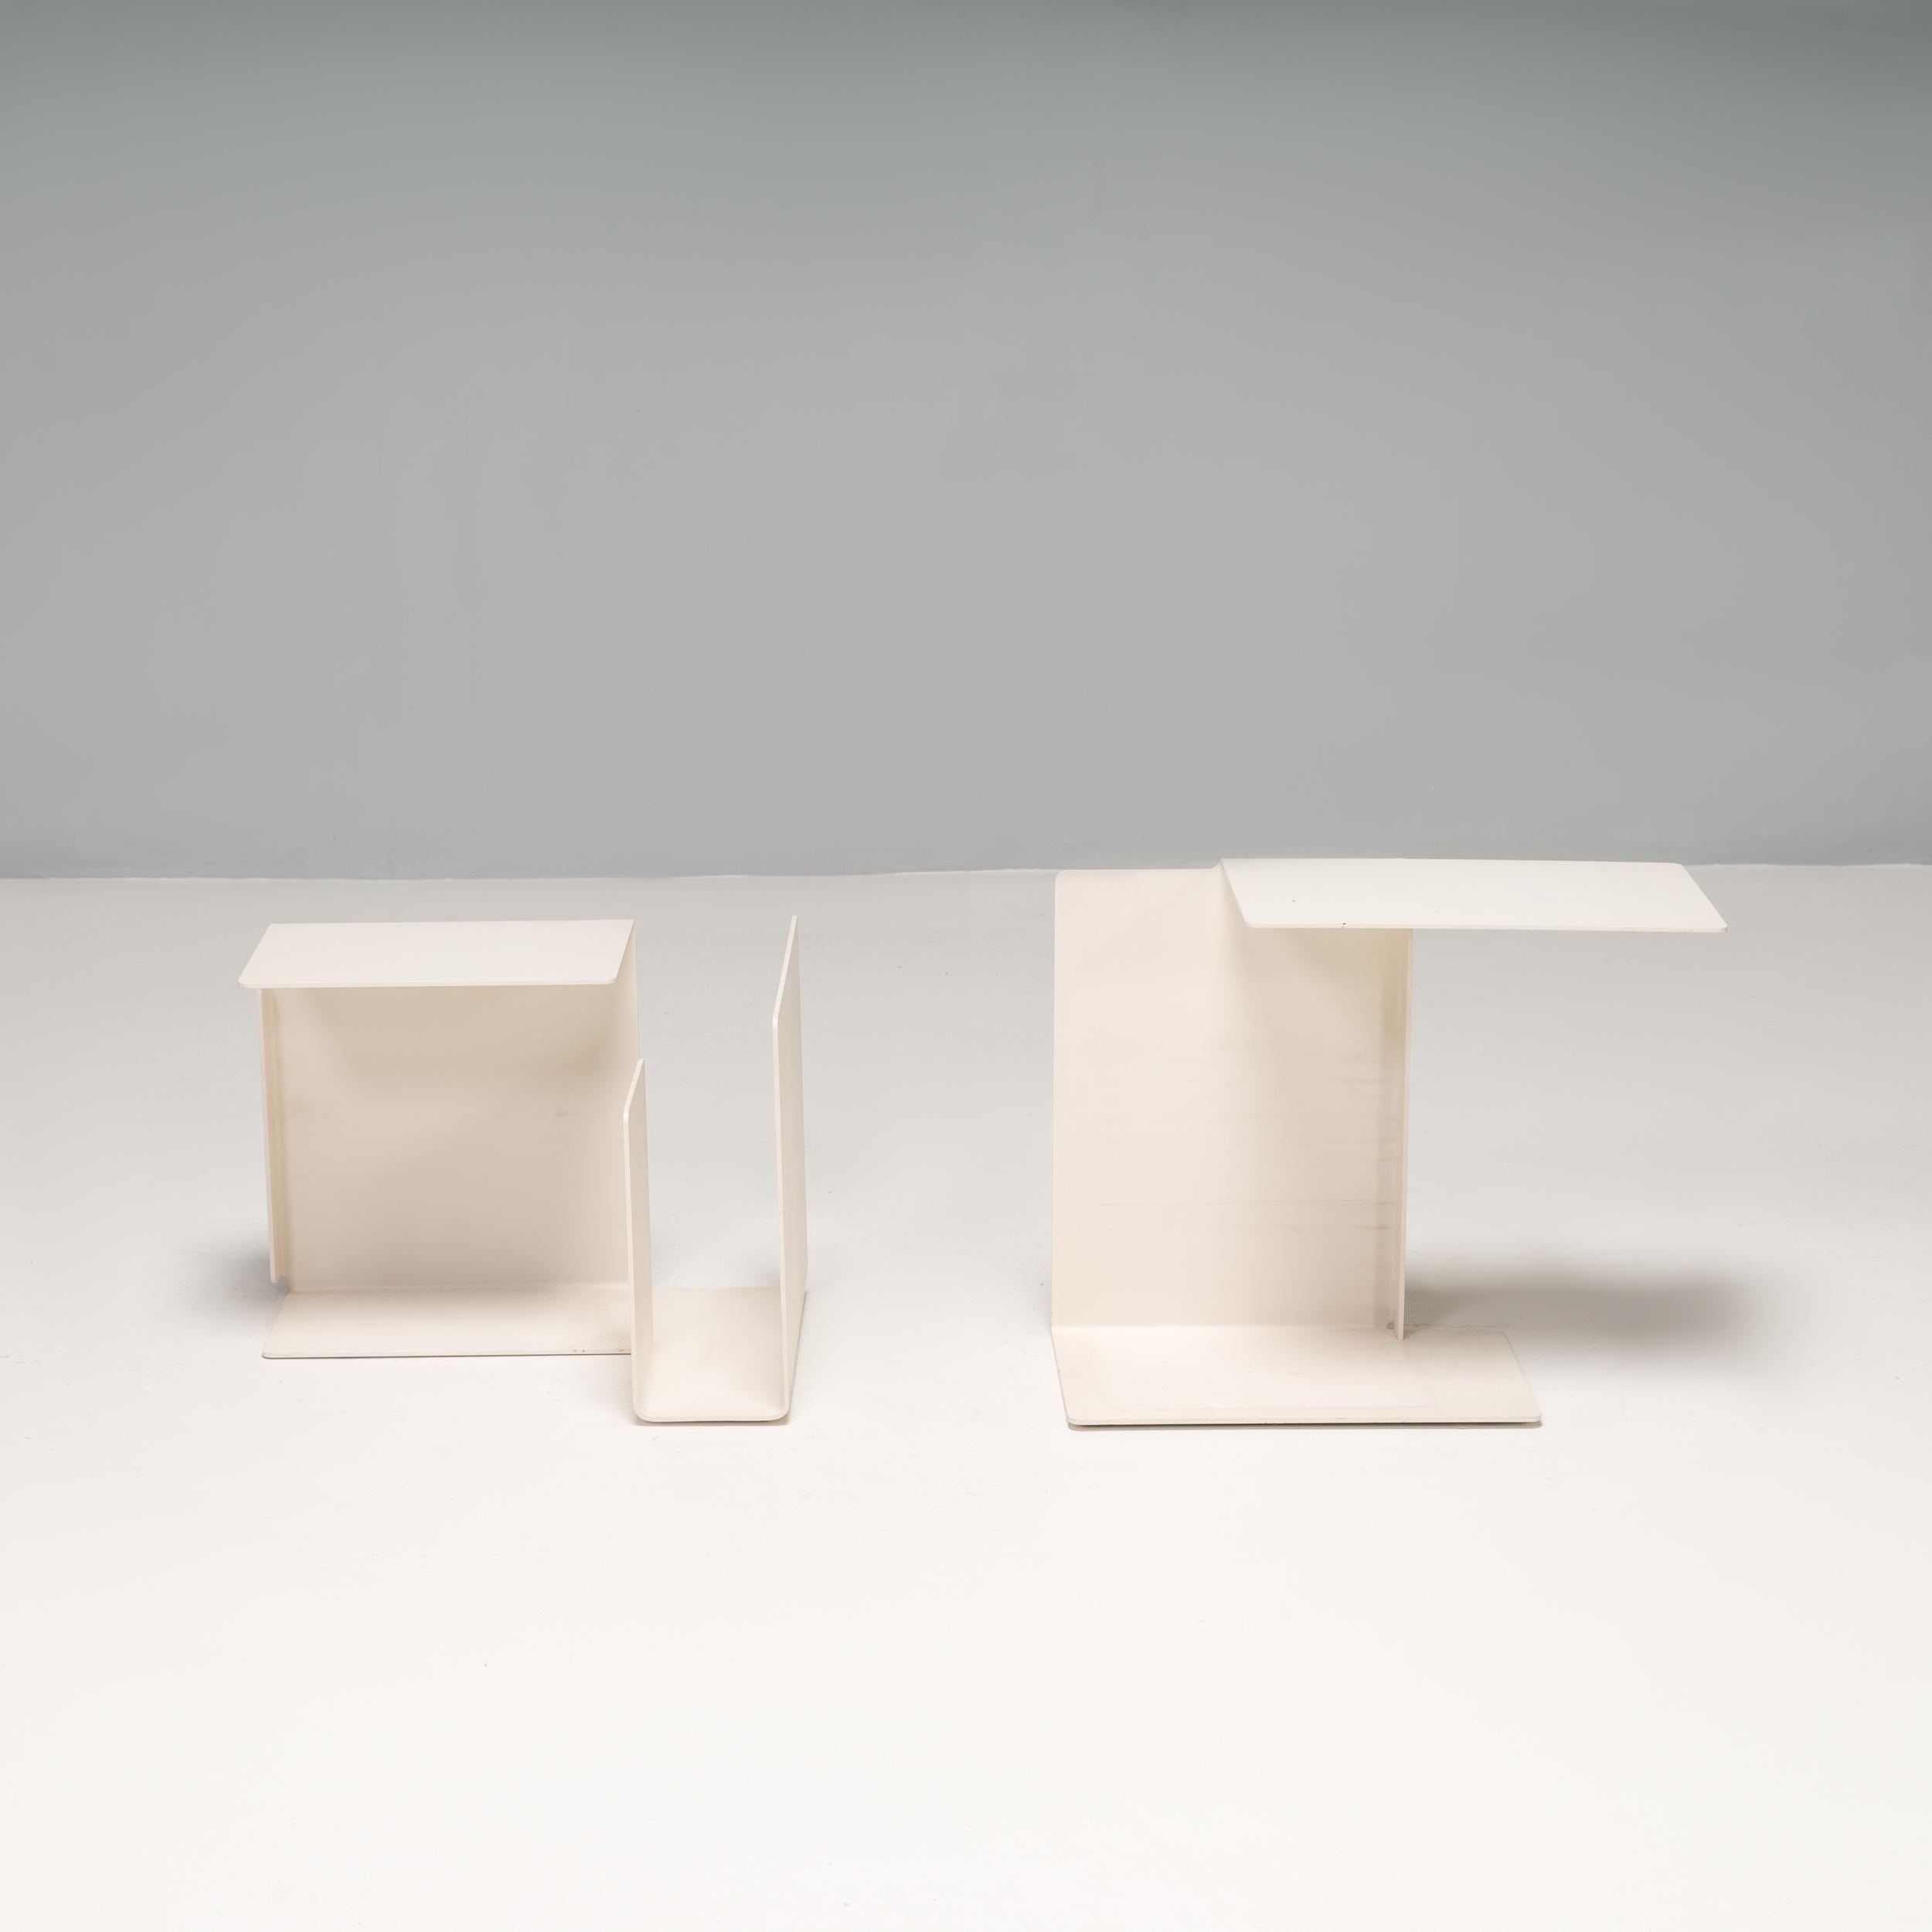 German Konstantin Grcic for Classicon Diana E & F White Side Tables, Set of 2 For Sale